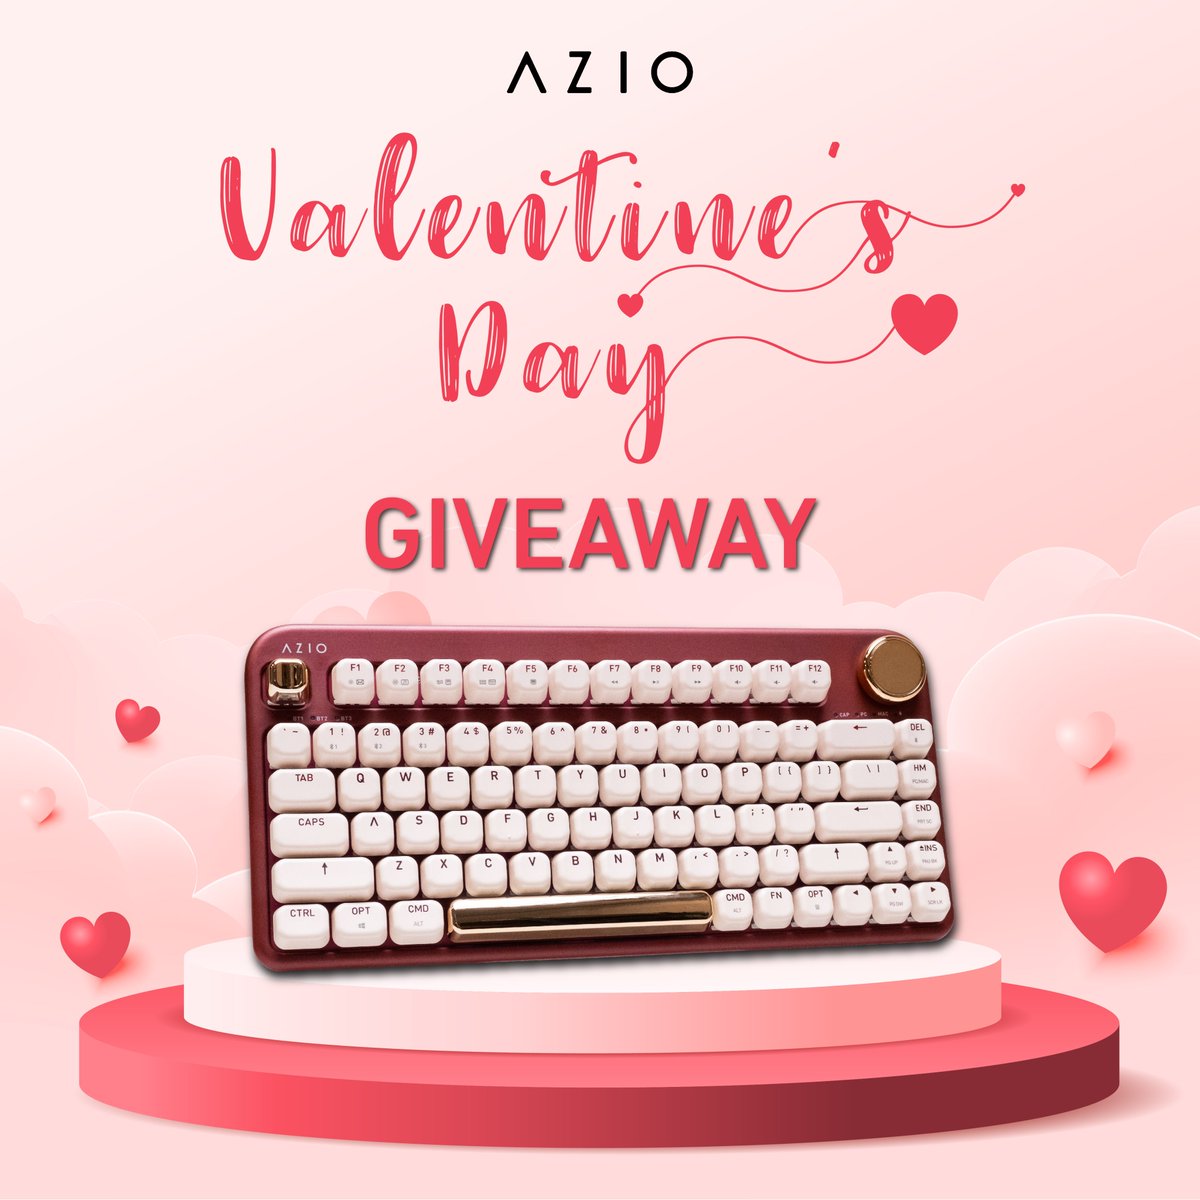 Want to win a #FREE keyboard? Head over to our Facebook and Instagram in our bio to enter! #azio #mechanicalkeyboard #giveaway #gamer #forfree #sweepstakes #valentines #valentinesday #gift #shop #sale #discount #cute #kawaii #love #anime #girlfriend #wife #partner #heart #gamer